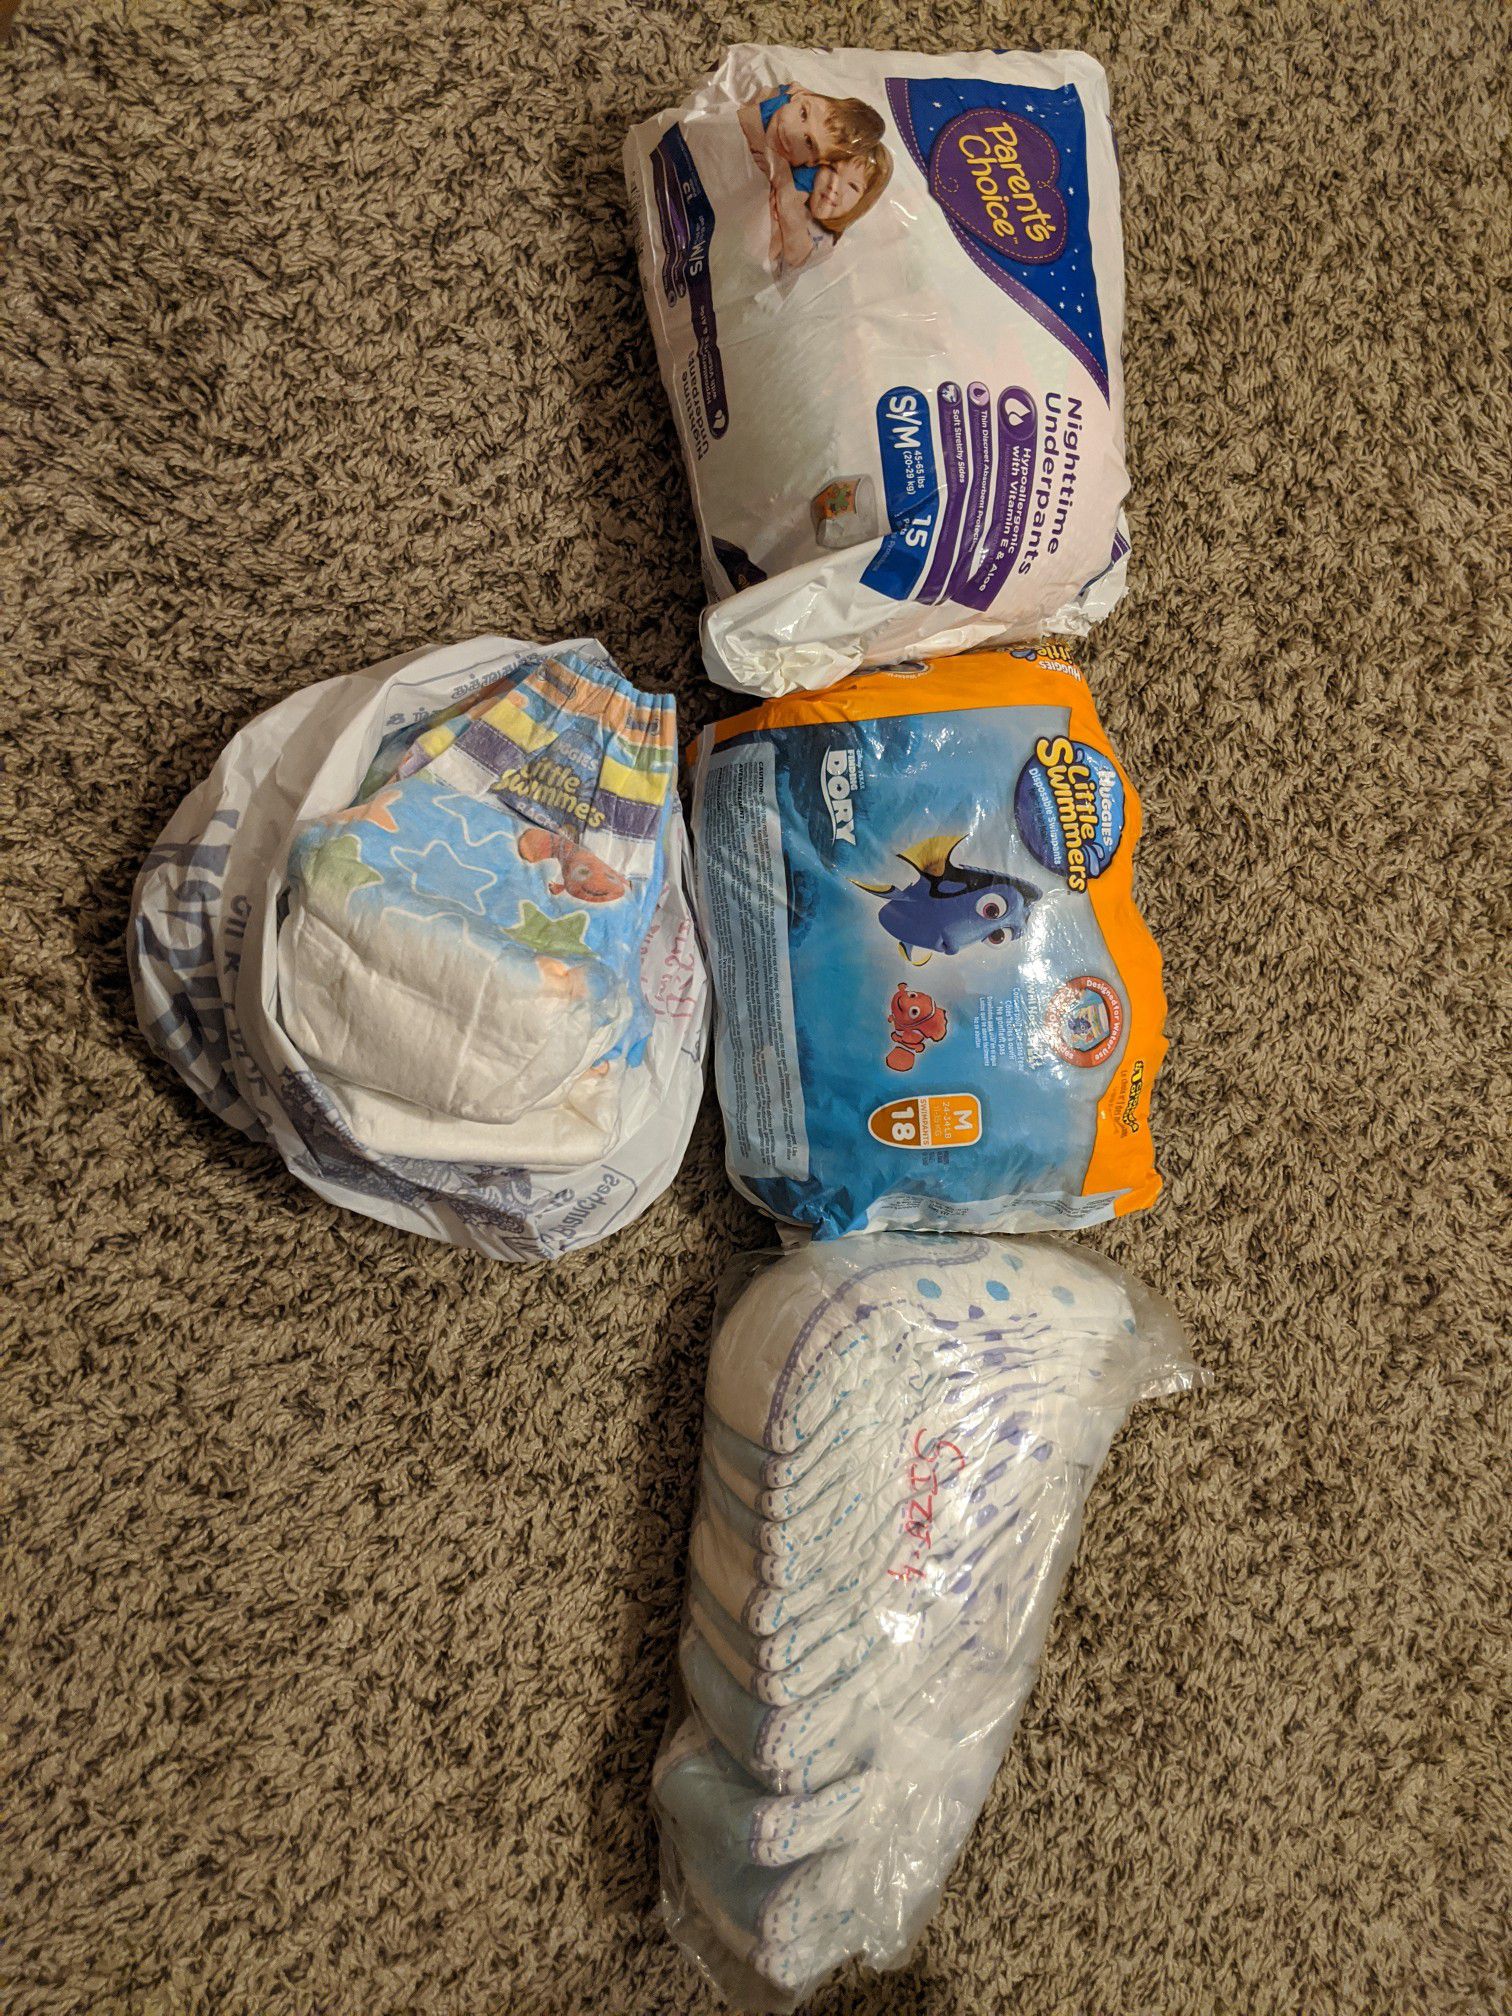 Diapers size 4